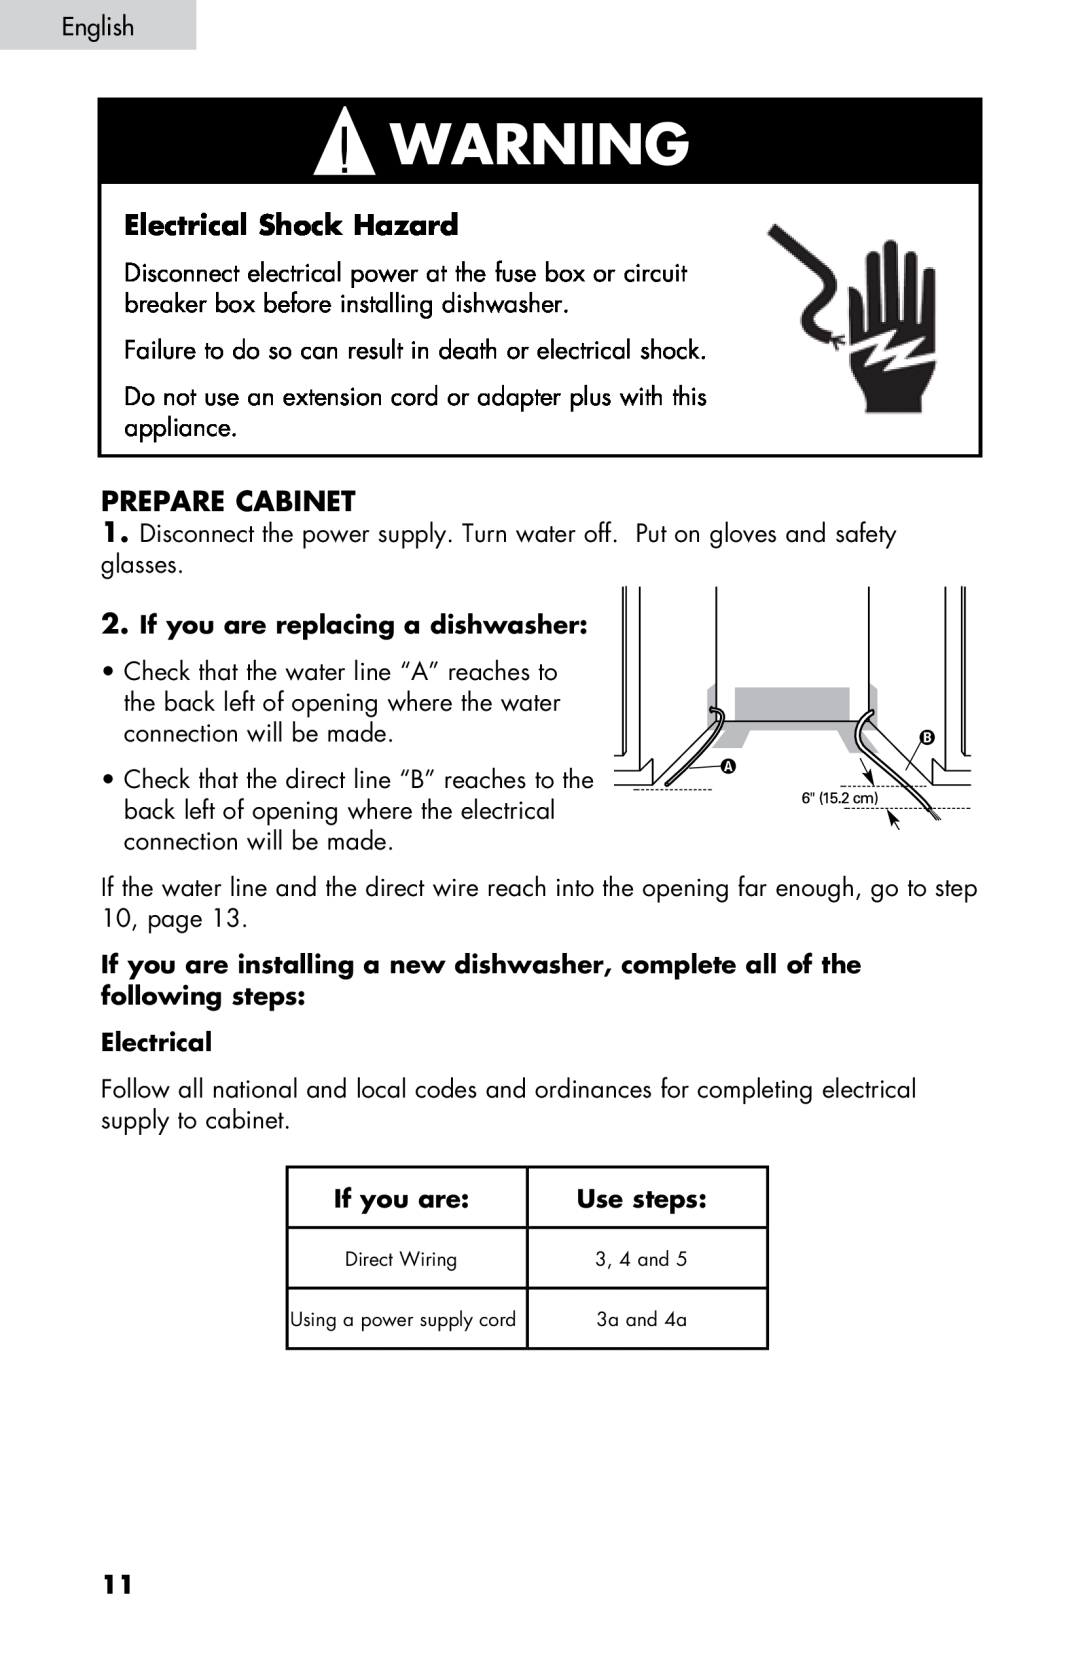 Haier DW-7777-01 manual Electrical Shock Hazard, Prepare cabinet, If you are replacing a dishwasher, Use steps 